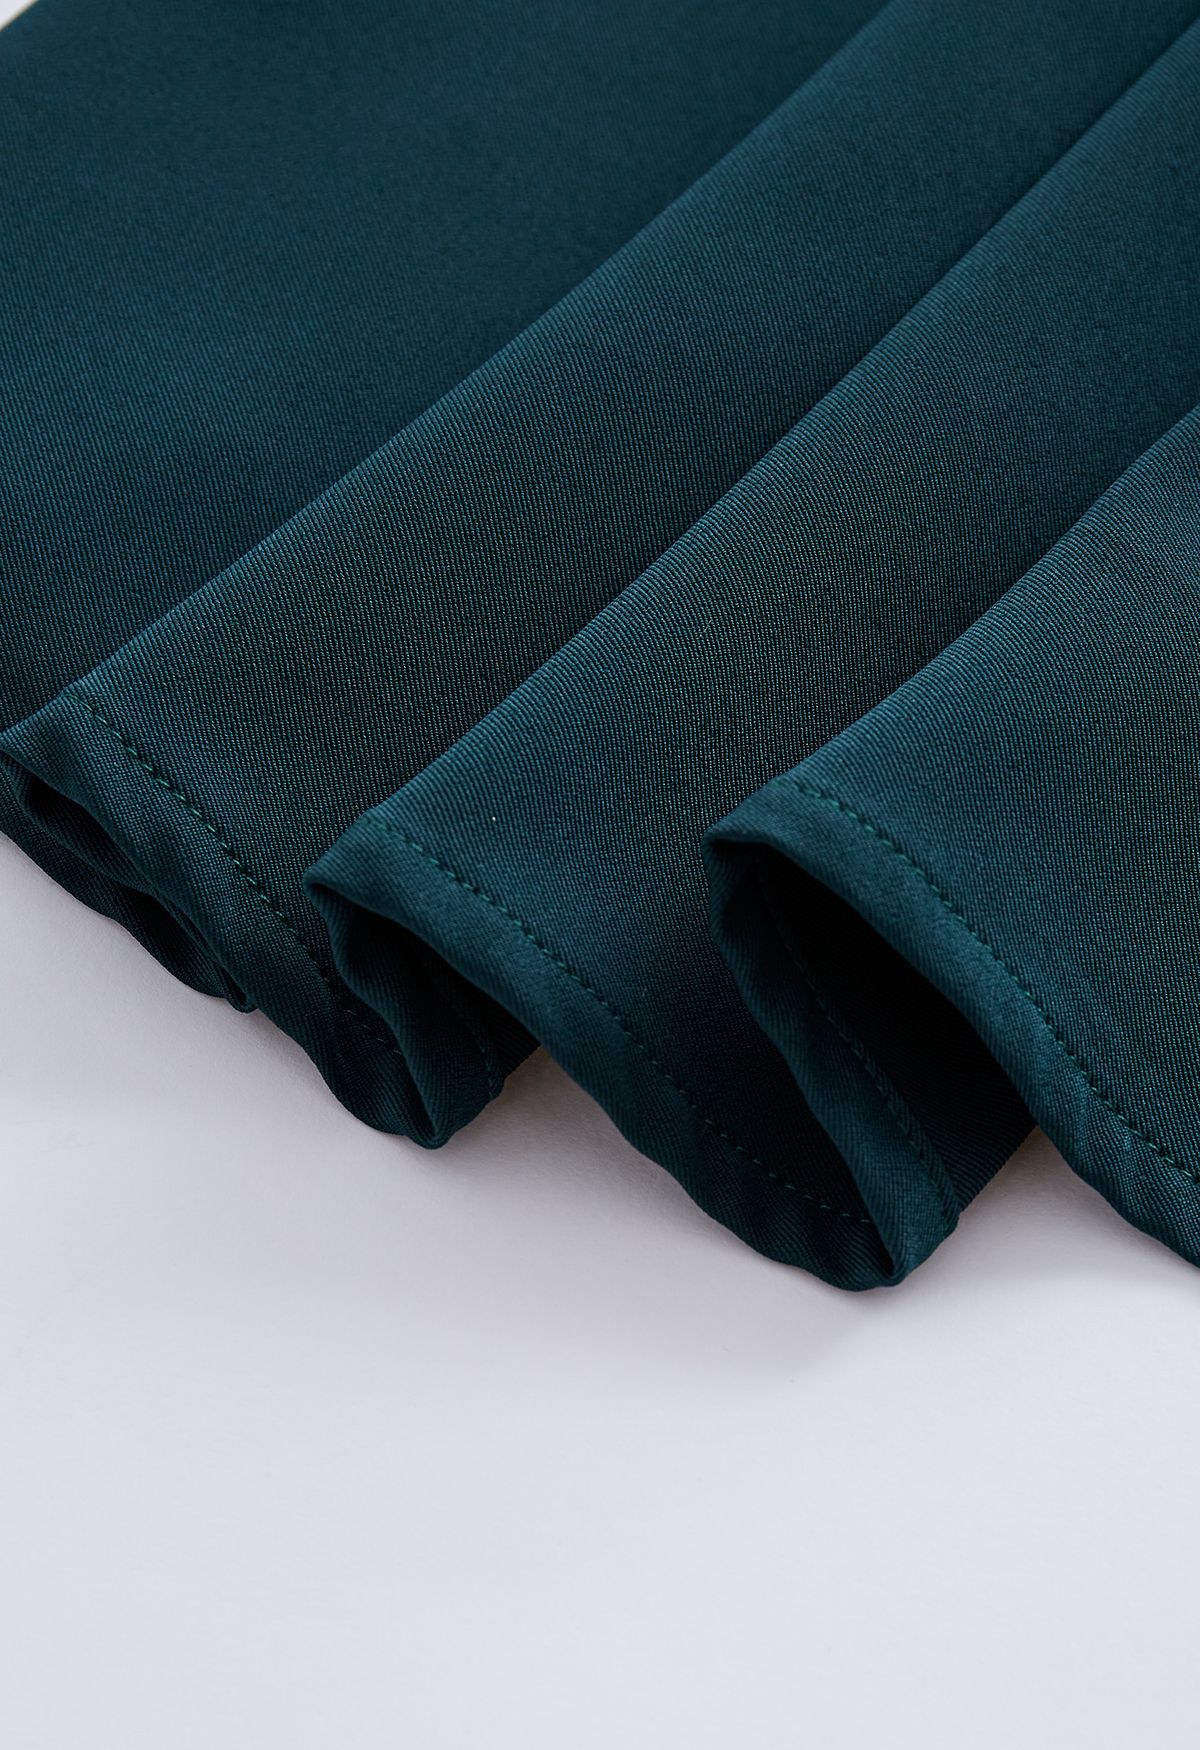 Buttoned Pleated A-Line Skirt in Dark Green